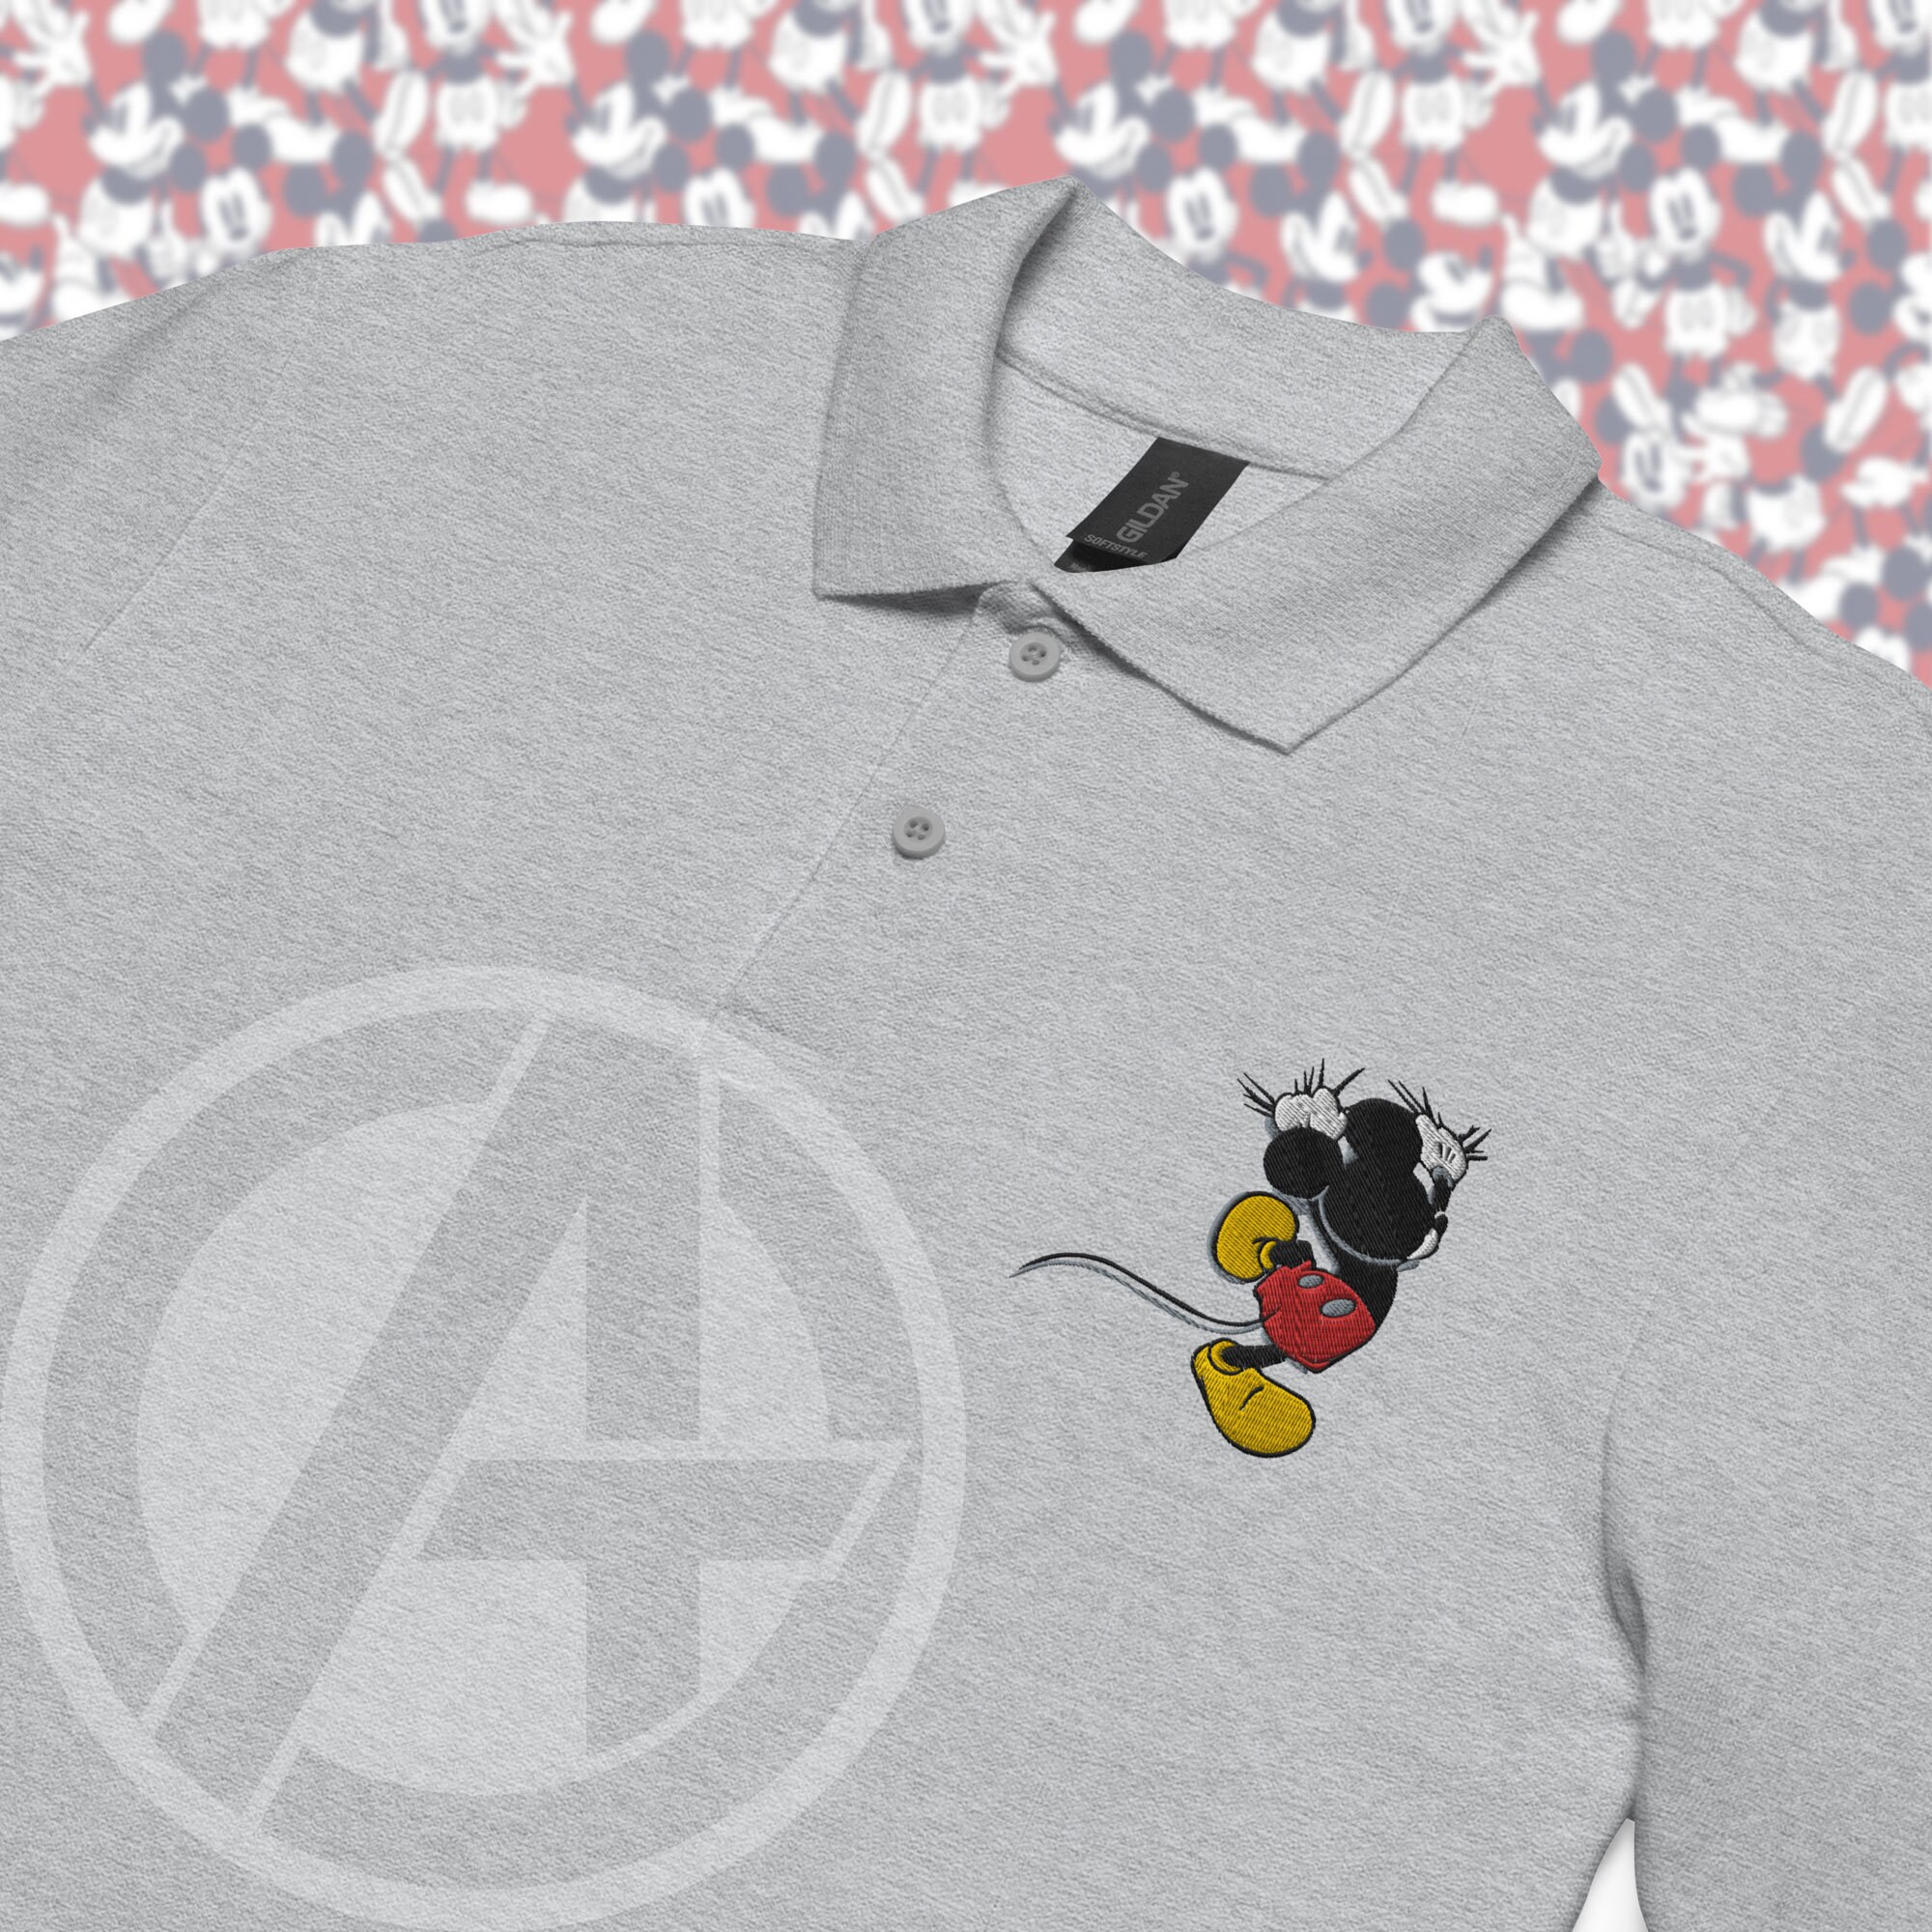 Mickey Mouse Embroidered Tshirt. Disney Micky Tee